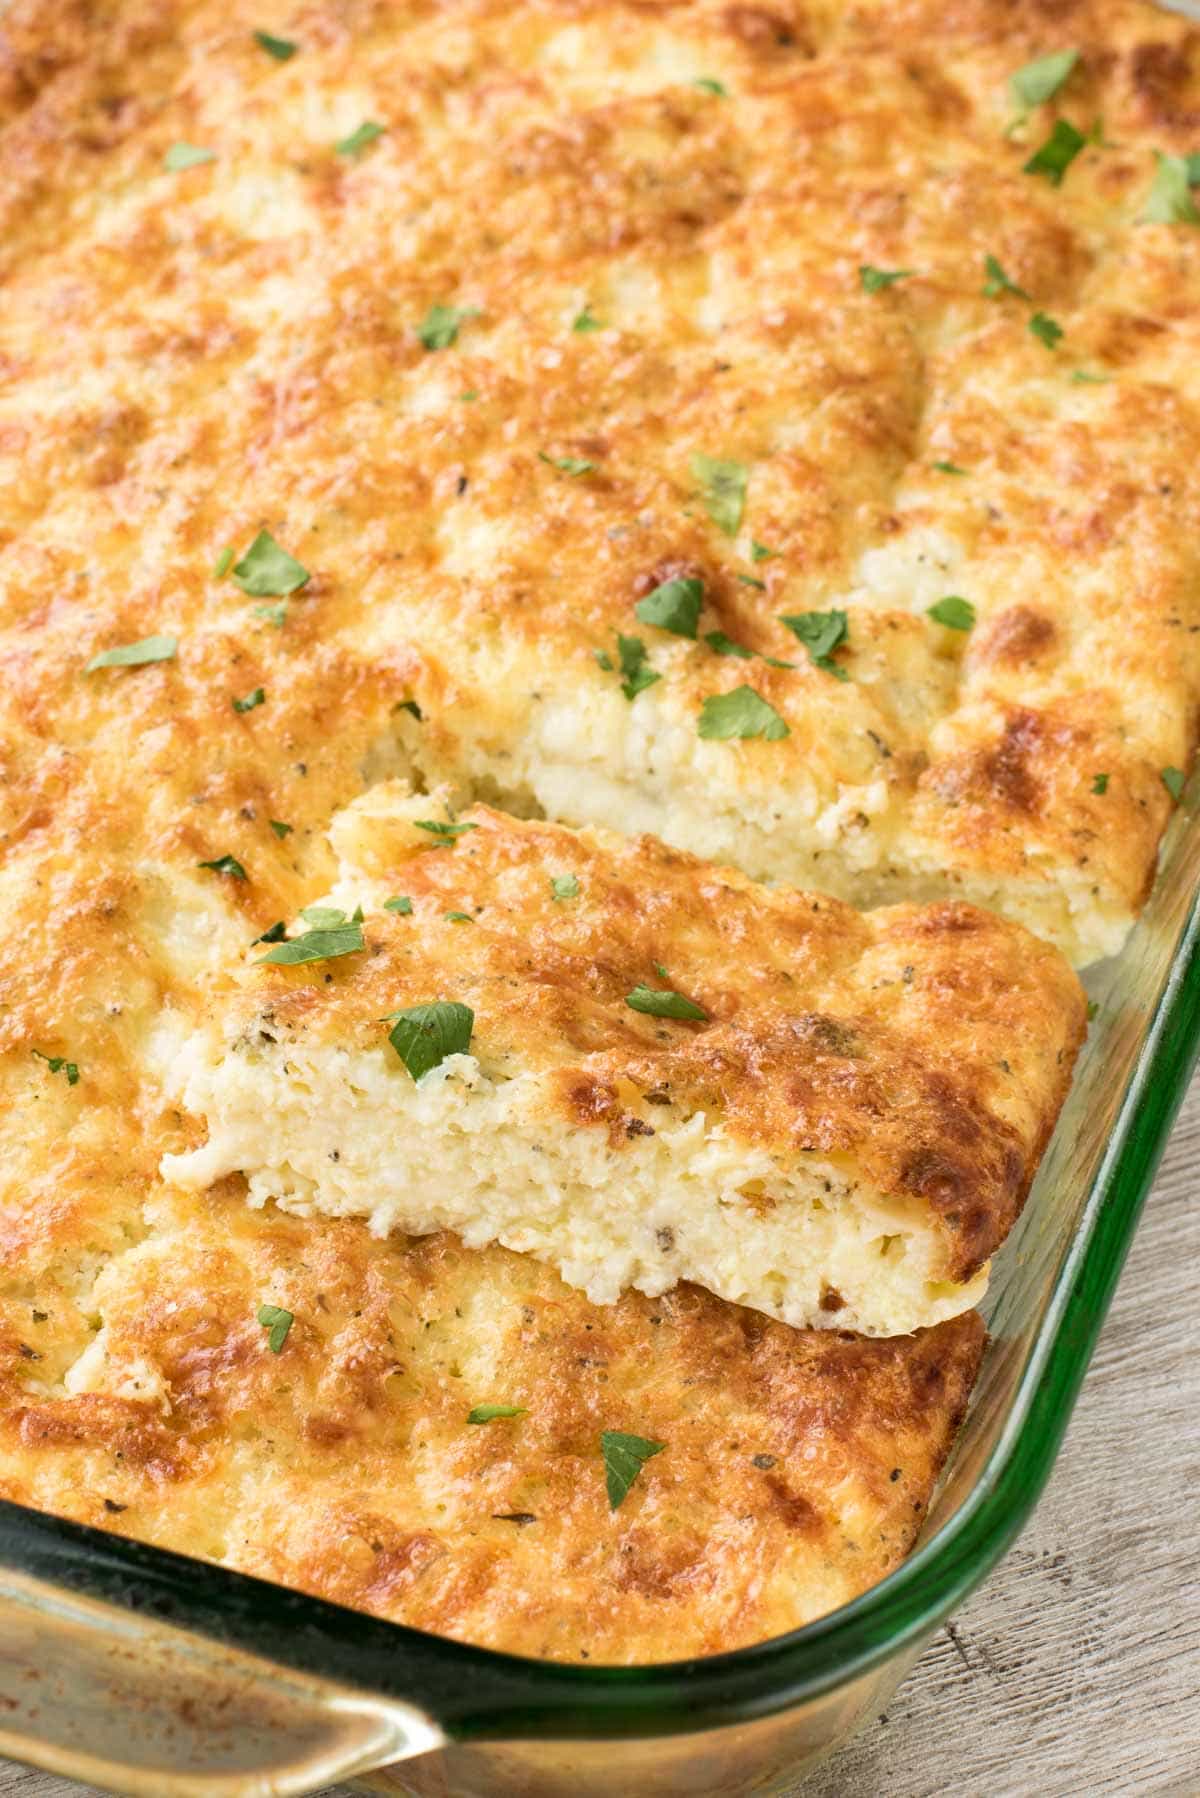 Buttery Cheesy Egg Casserole - this recipe is the perfect baked egg recipe for brunch! It's full of cheese and spices and everyone loves it.